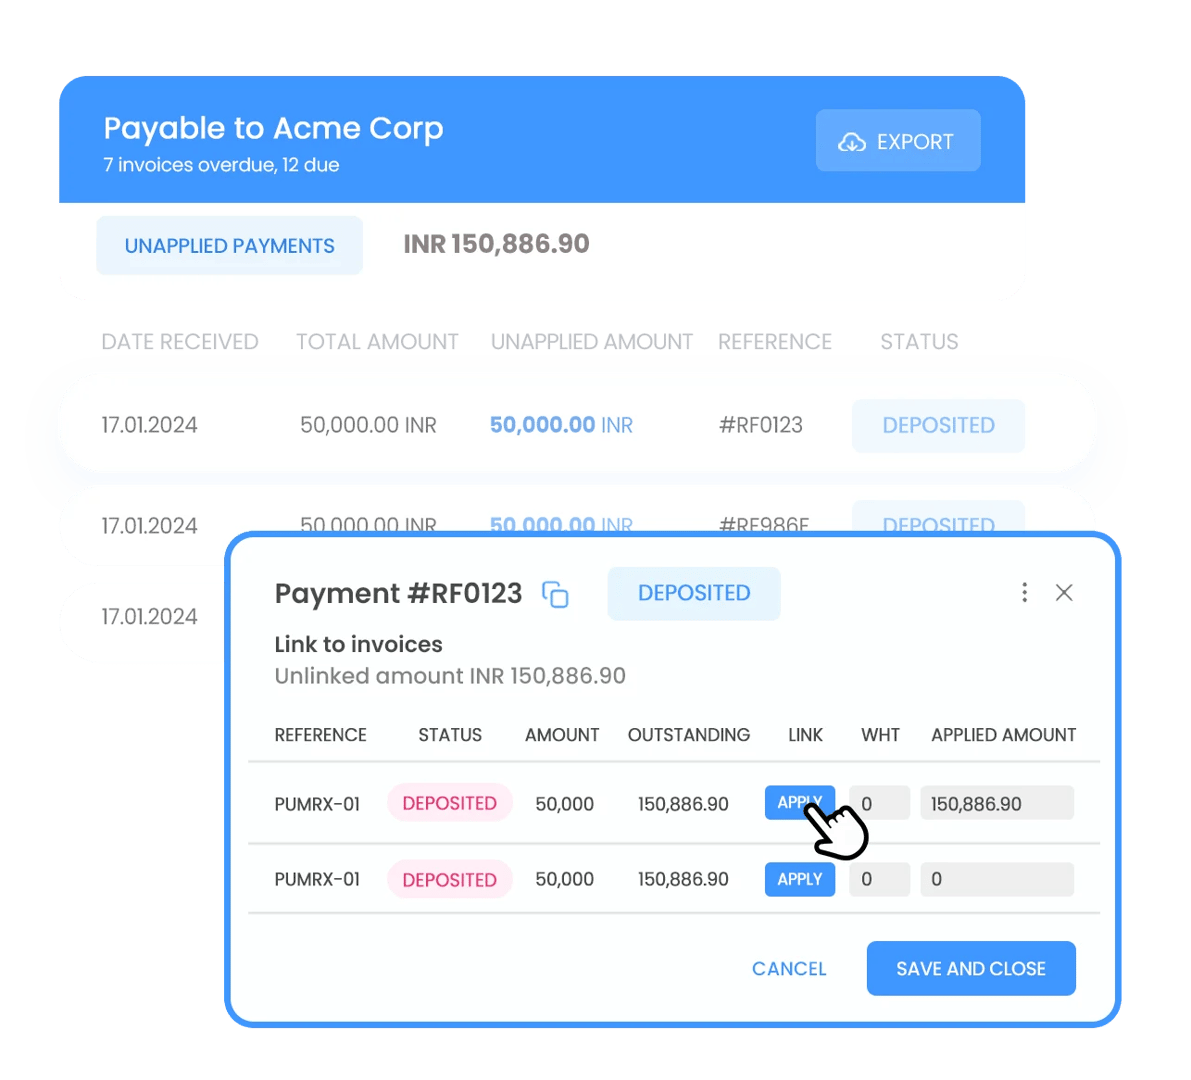 Unburden your customers to add your company's payment details for every payment. With Peakflo, each of your customers will have their dedicated and unique virtual accounts for easier payments and automatic reconciliation.